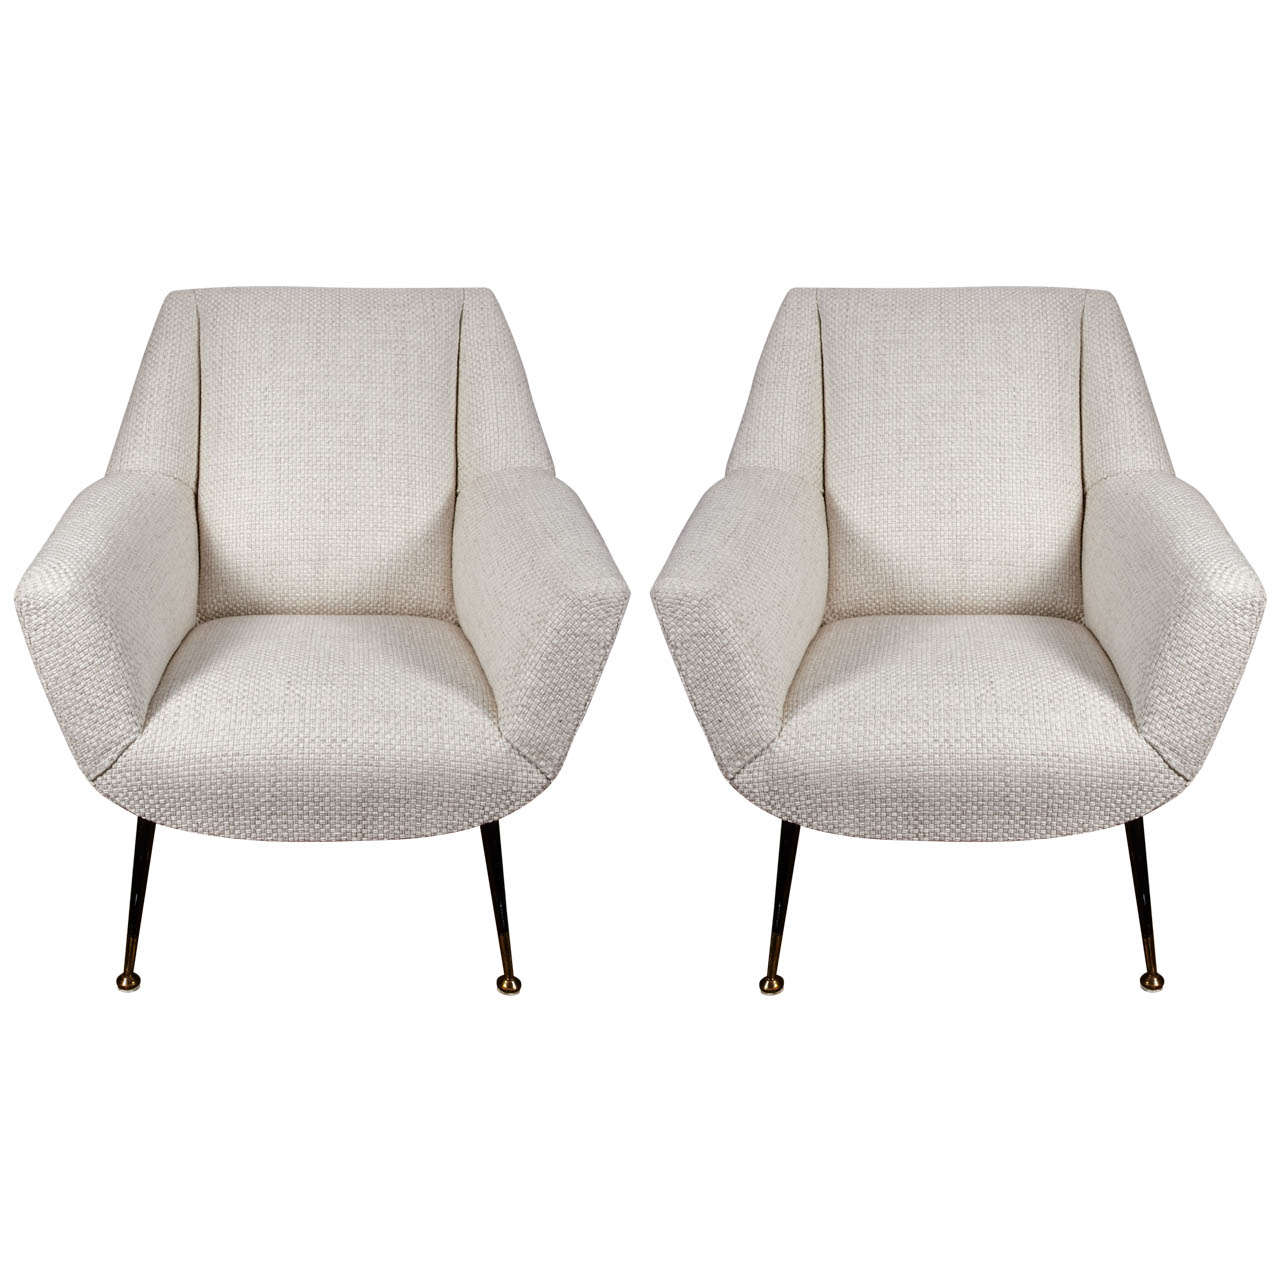 Pair of Italian Armchairs Entirely Reupholstered in Ivory Fabric